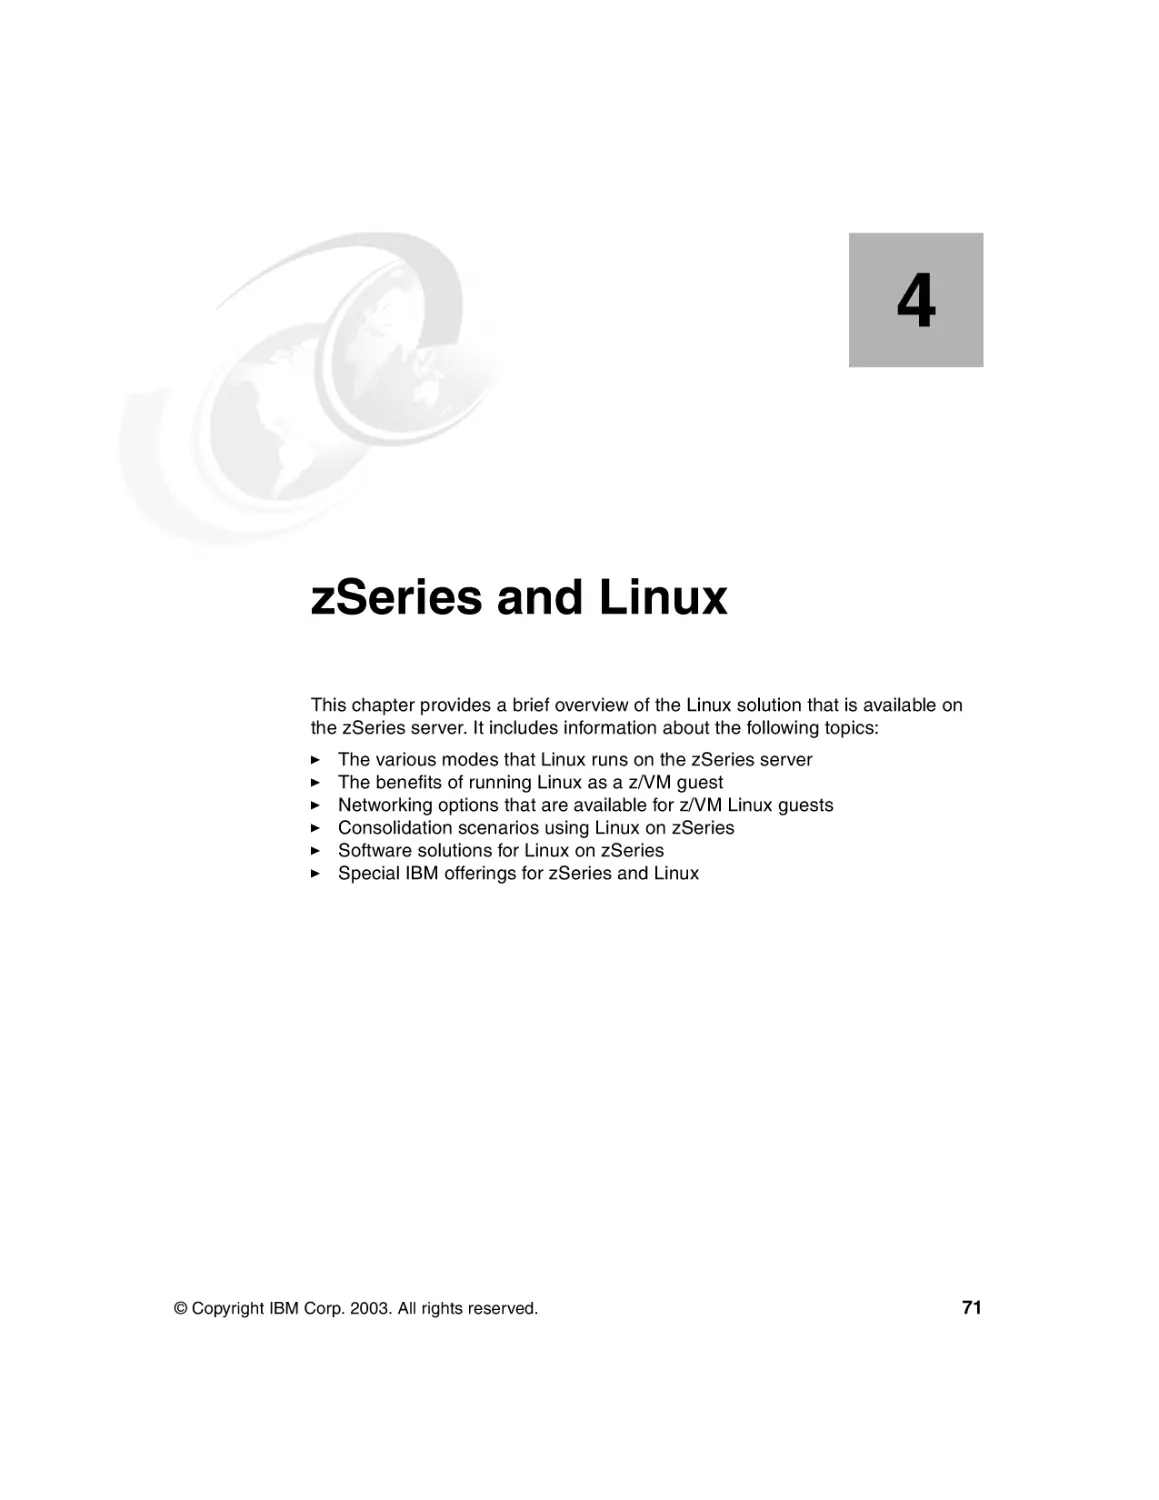 Chapter 4. zSeries and Linux